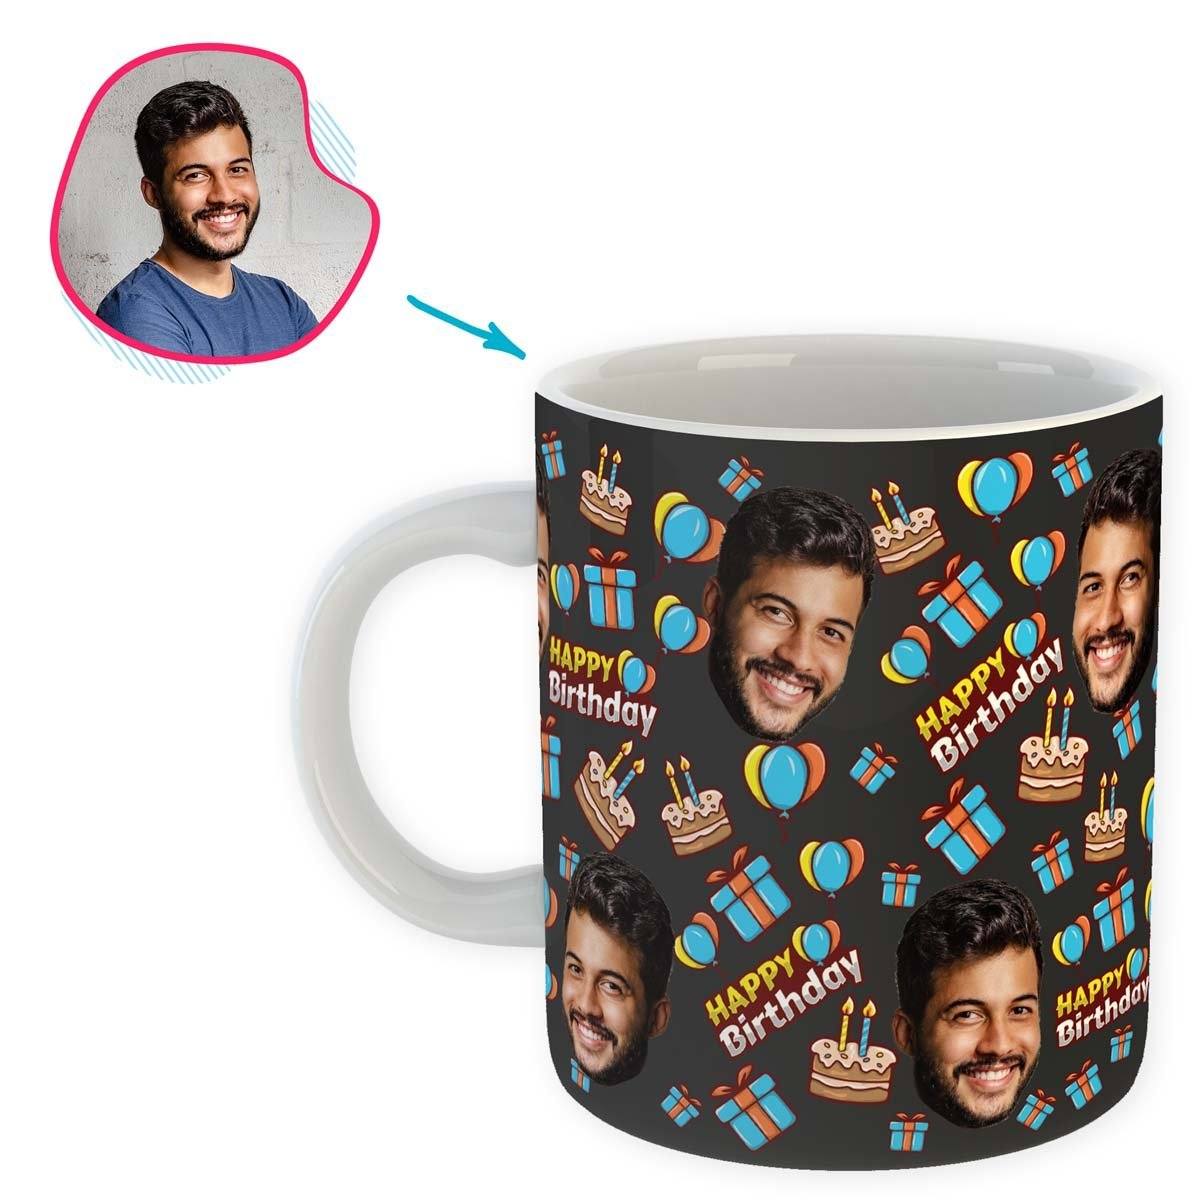 dark Birthday mug personalized with photo of face printed on it